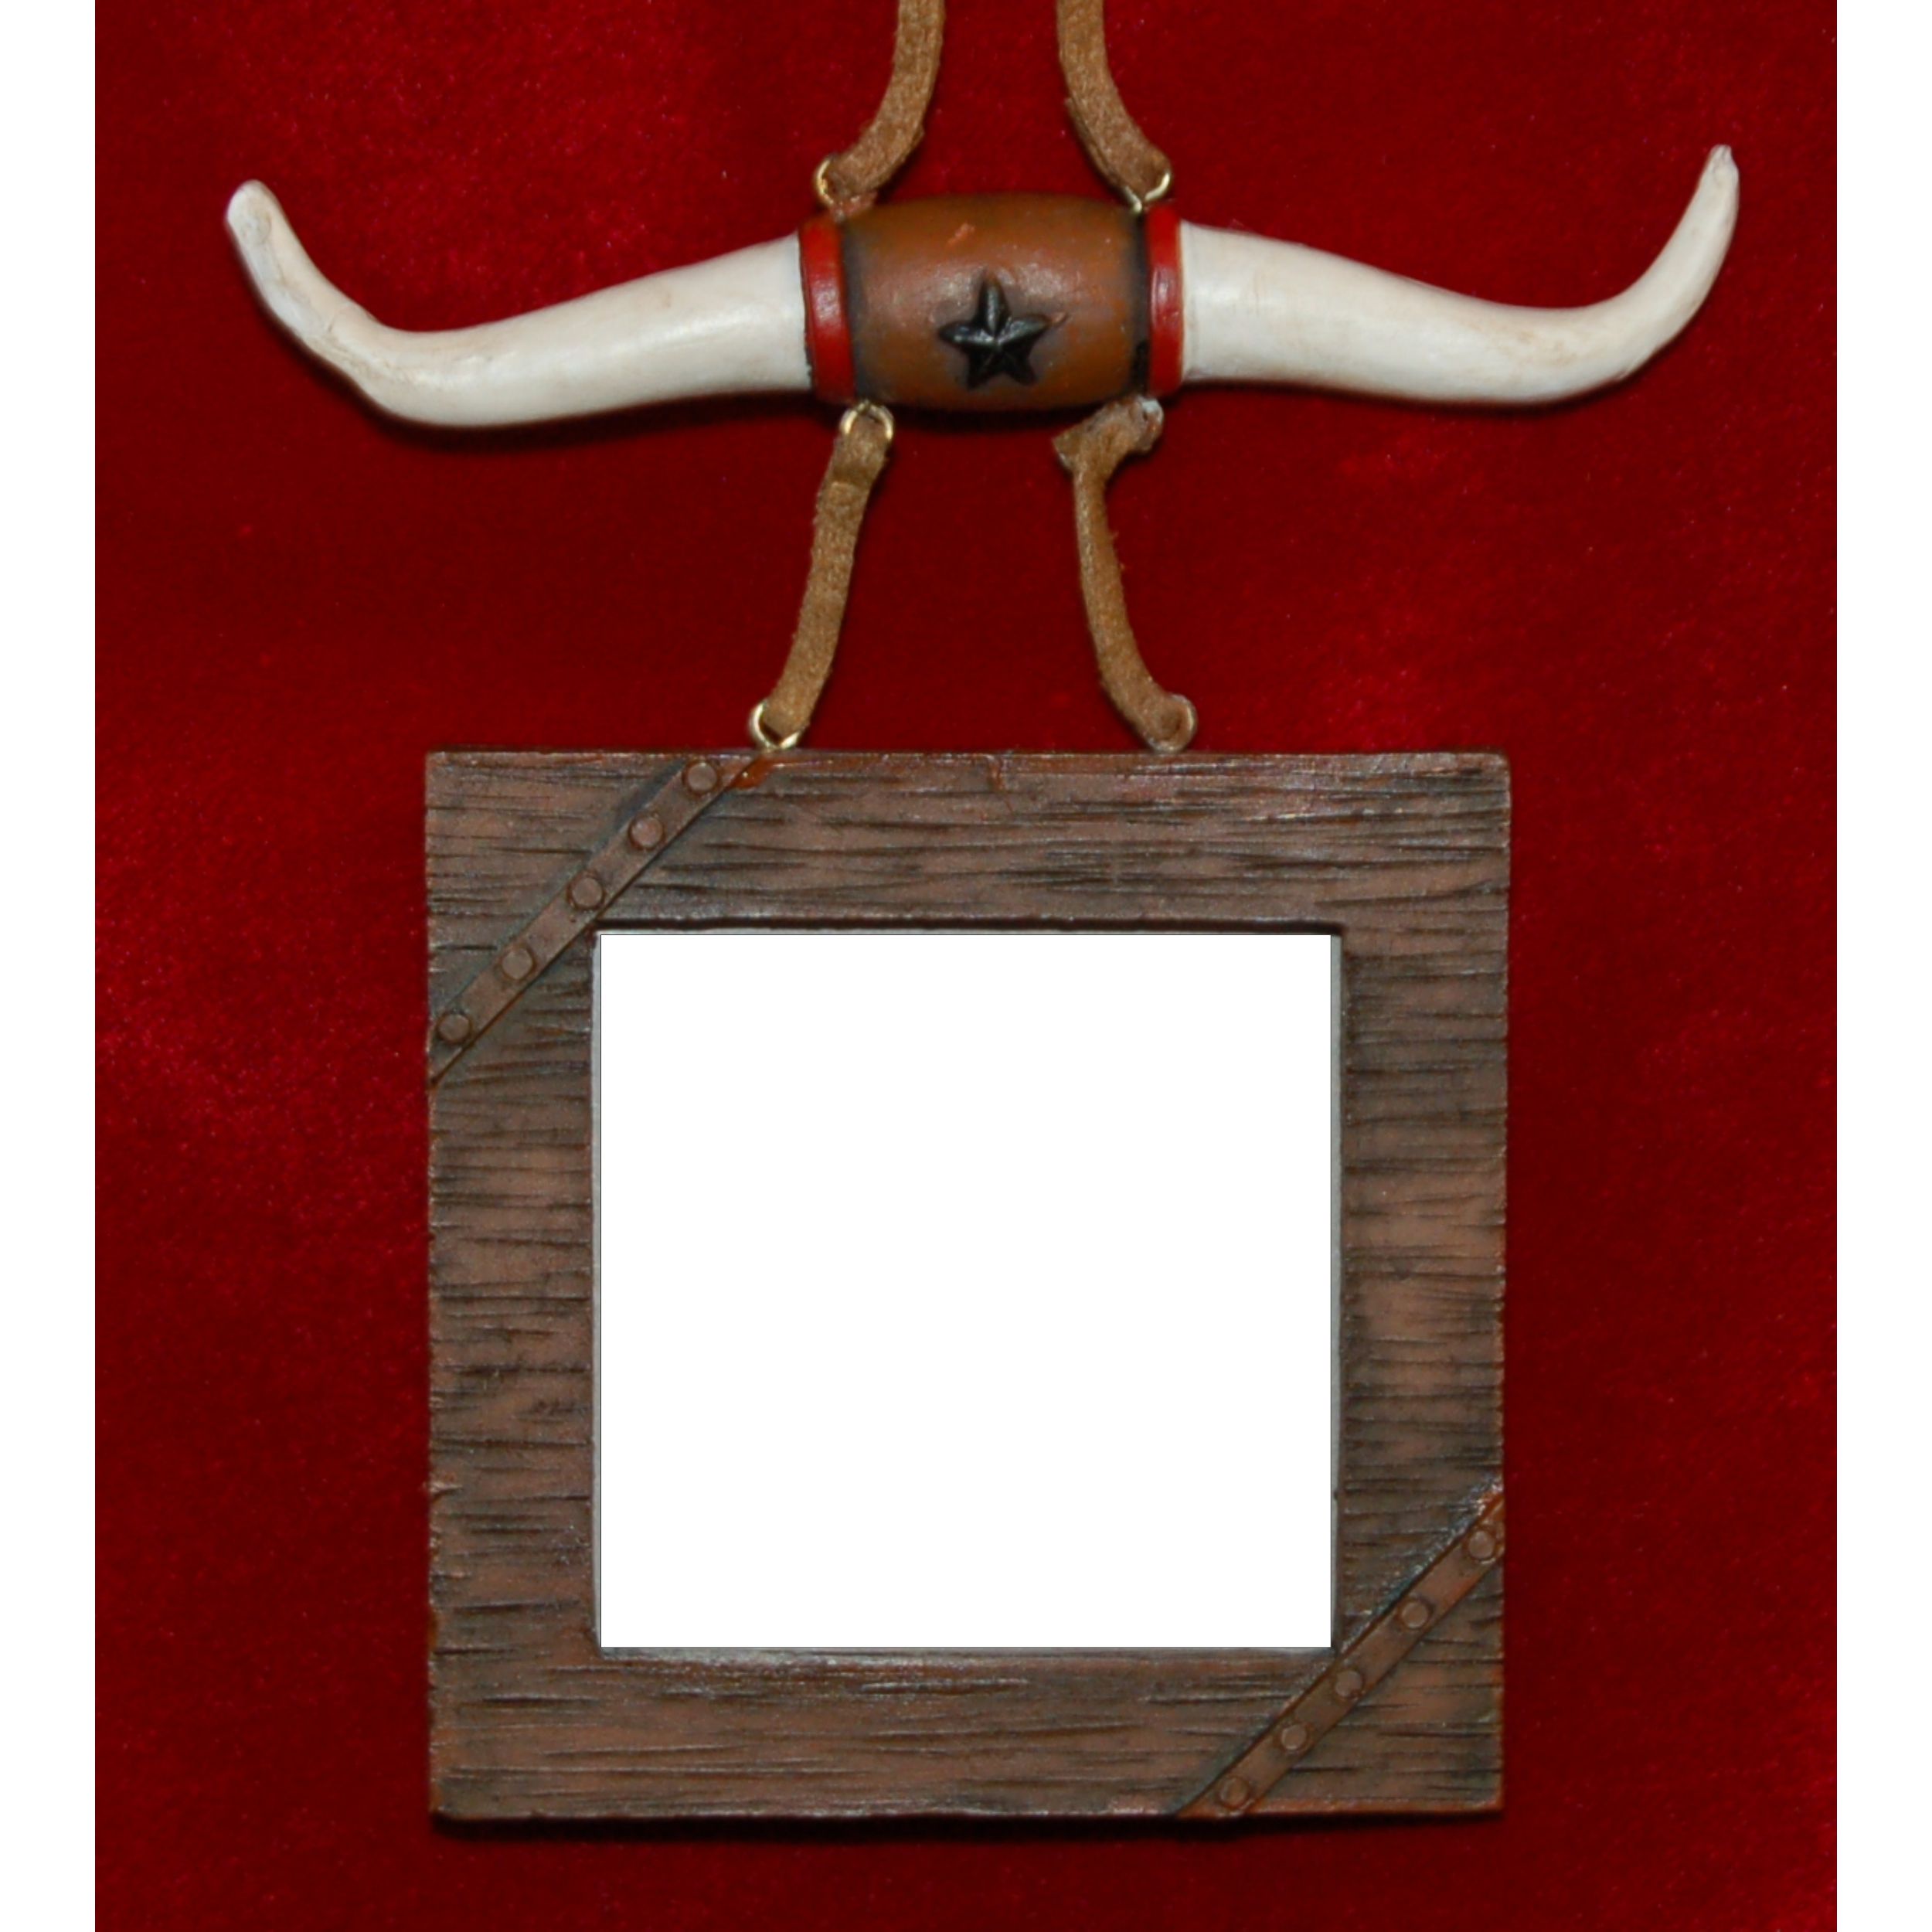 Western Christmas Ornament Longhorns Frame Personalized by RussellRhodes.com